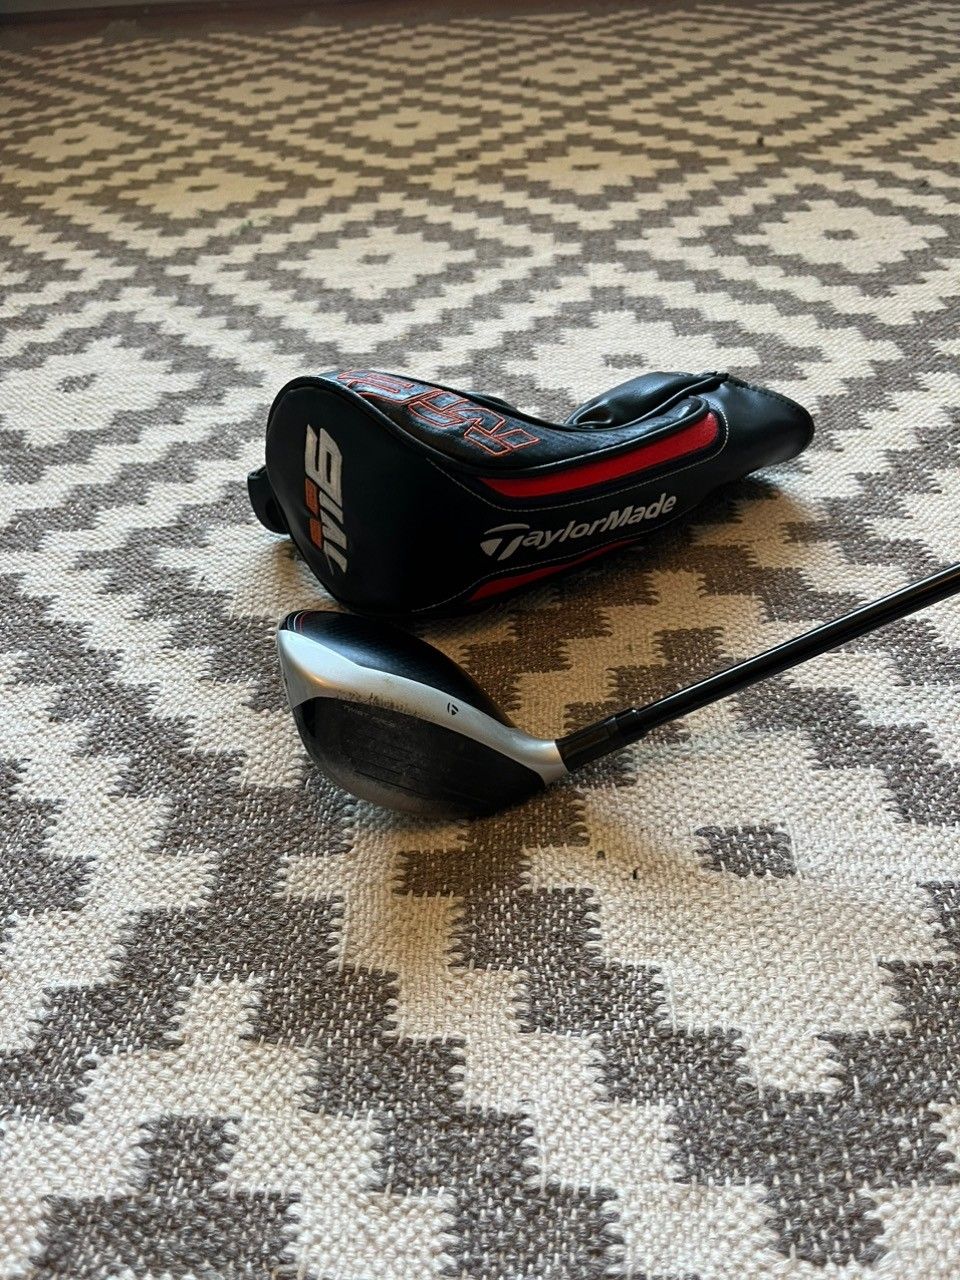 Taylormade M6 puu3 (fw3, right)